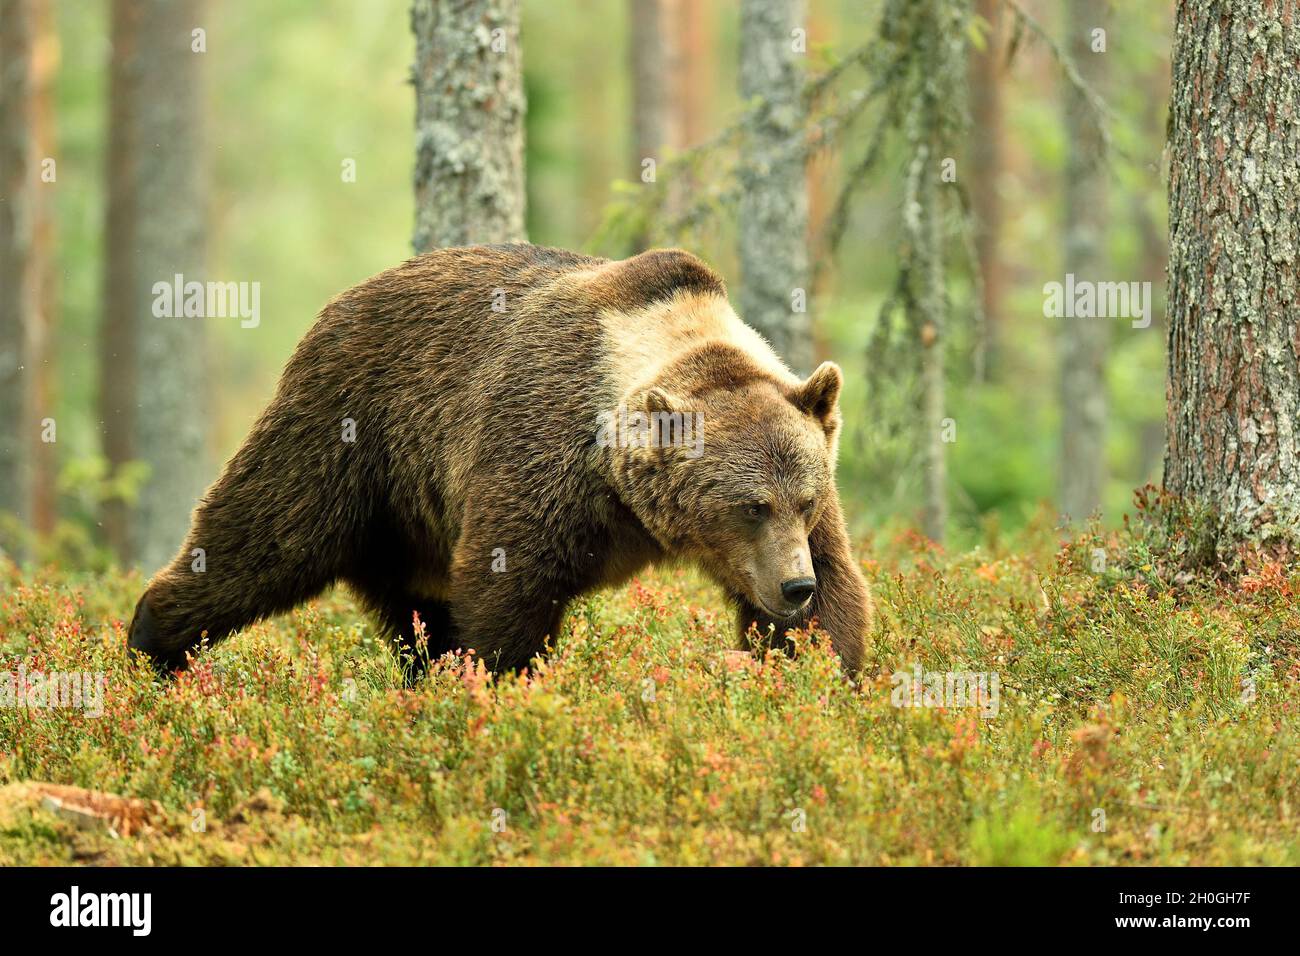 Brown bear walking in the forest Stock Photo